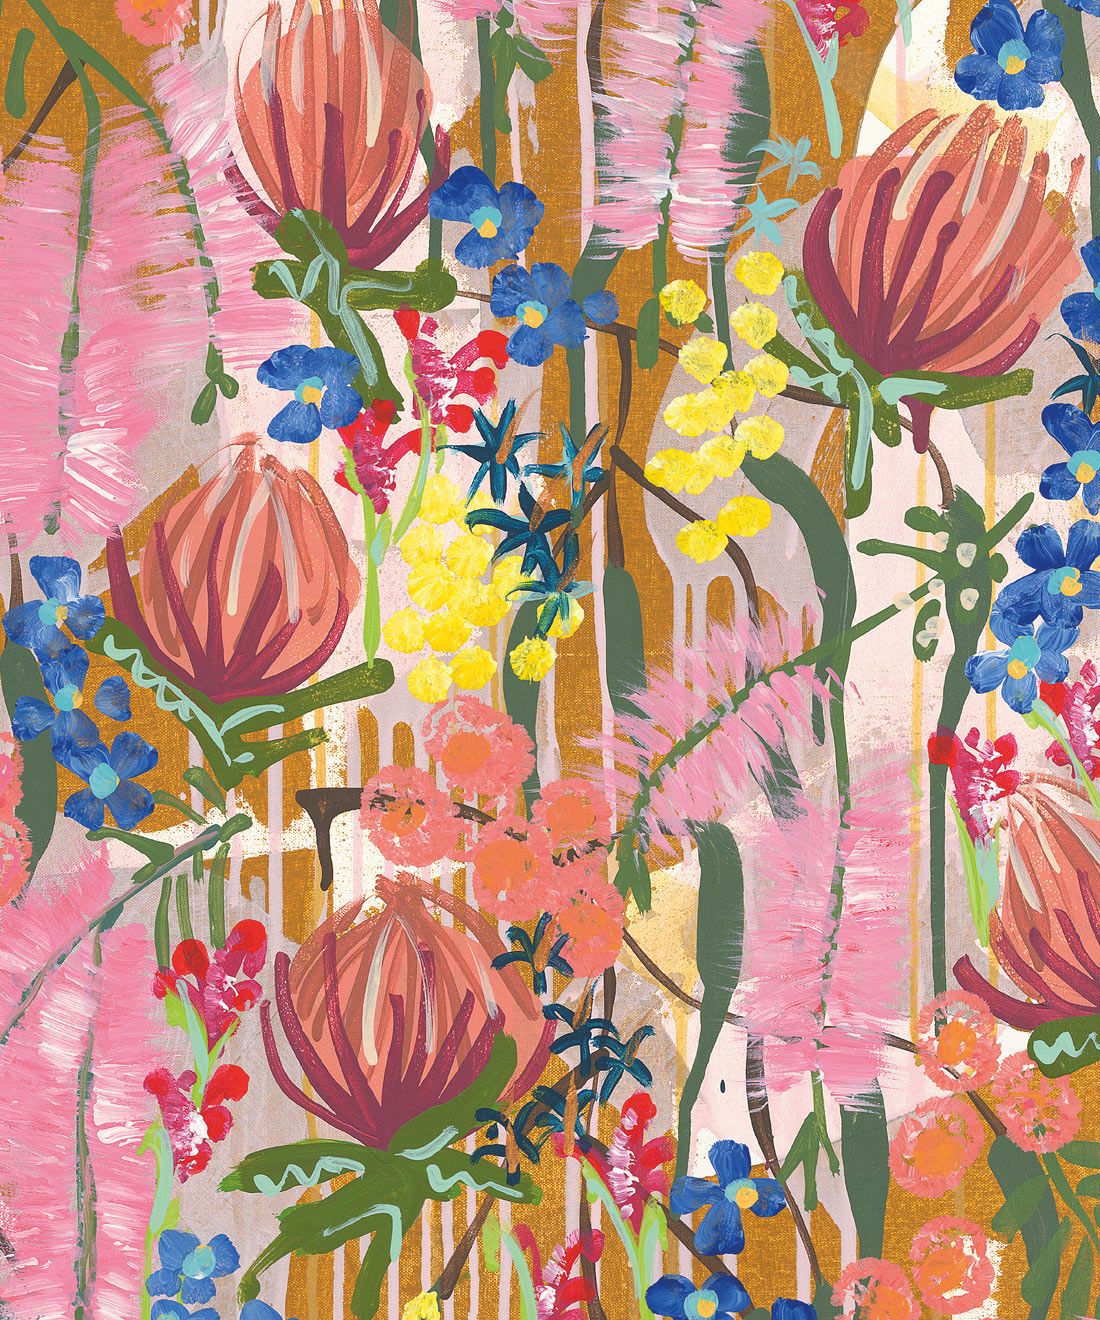 Acacia Wallpaper • Colourful Floral Wallpaper • Tiff Manuell • Abstract Expressionist Wallpaper • Swatch